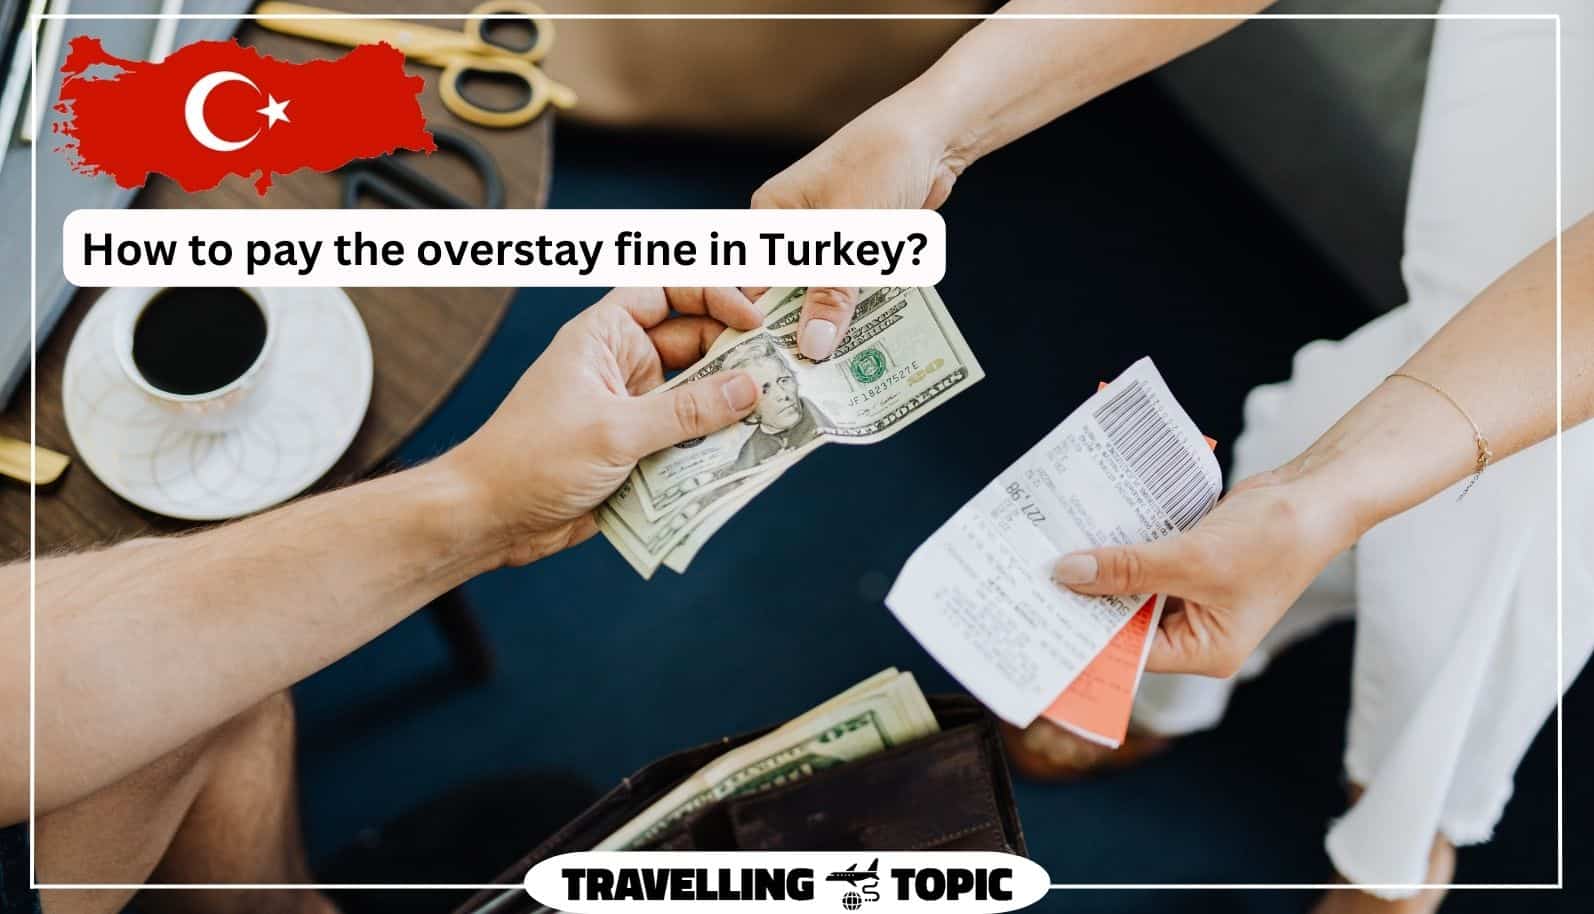 How to pay the overstay fine in Turkey